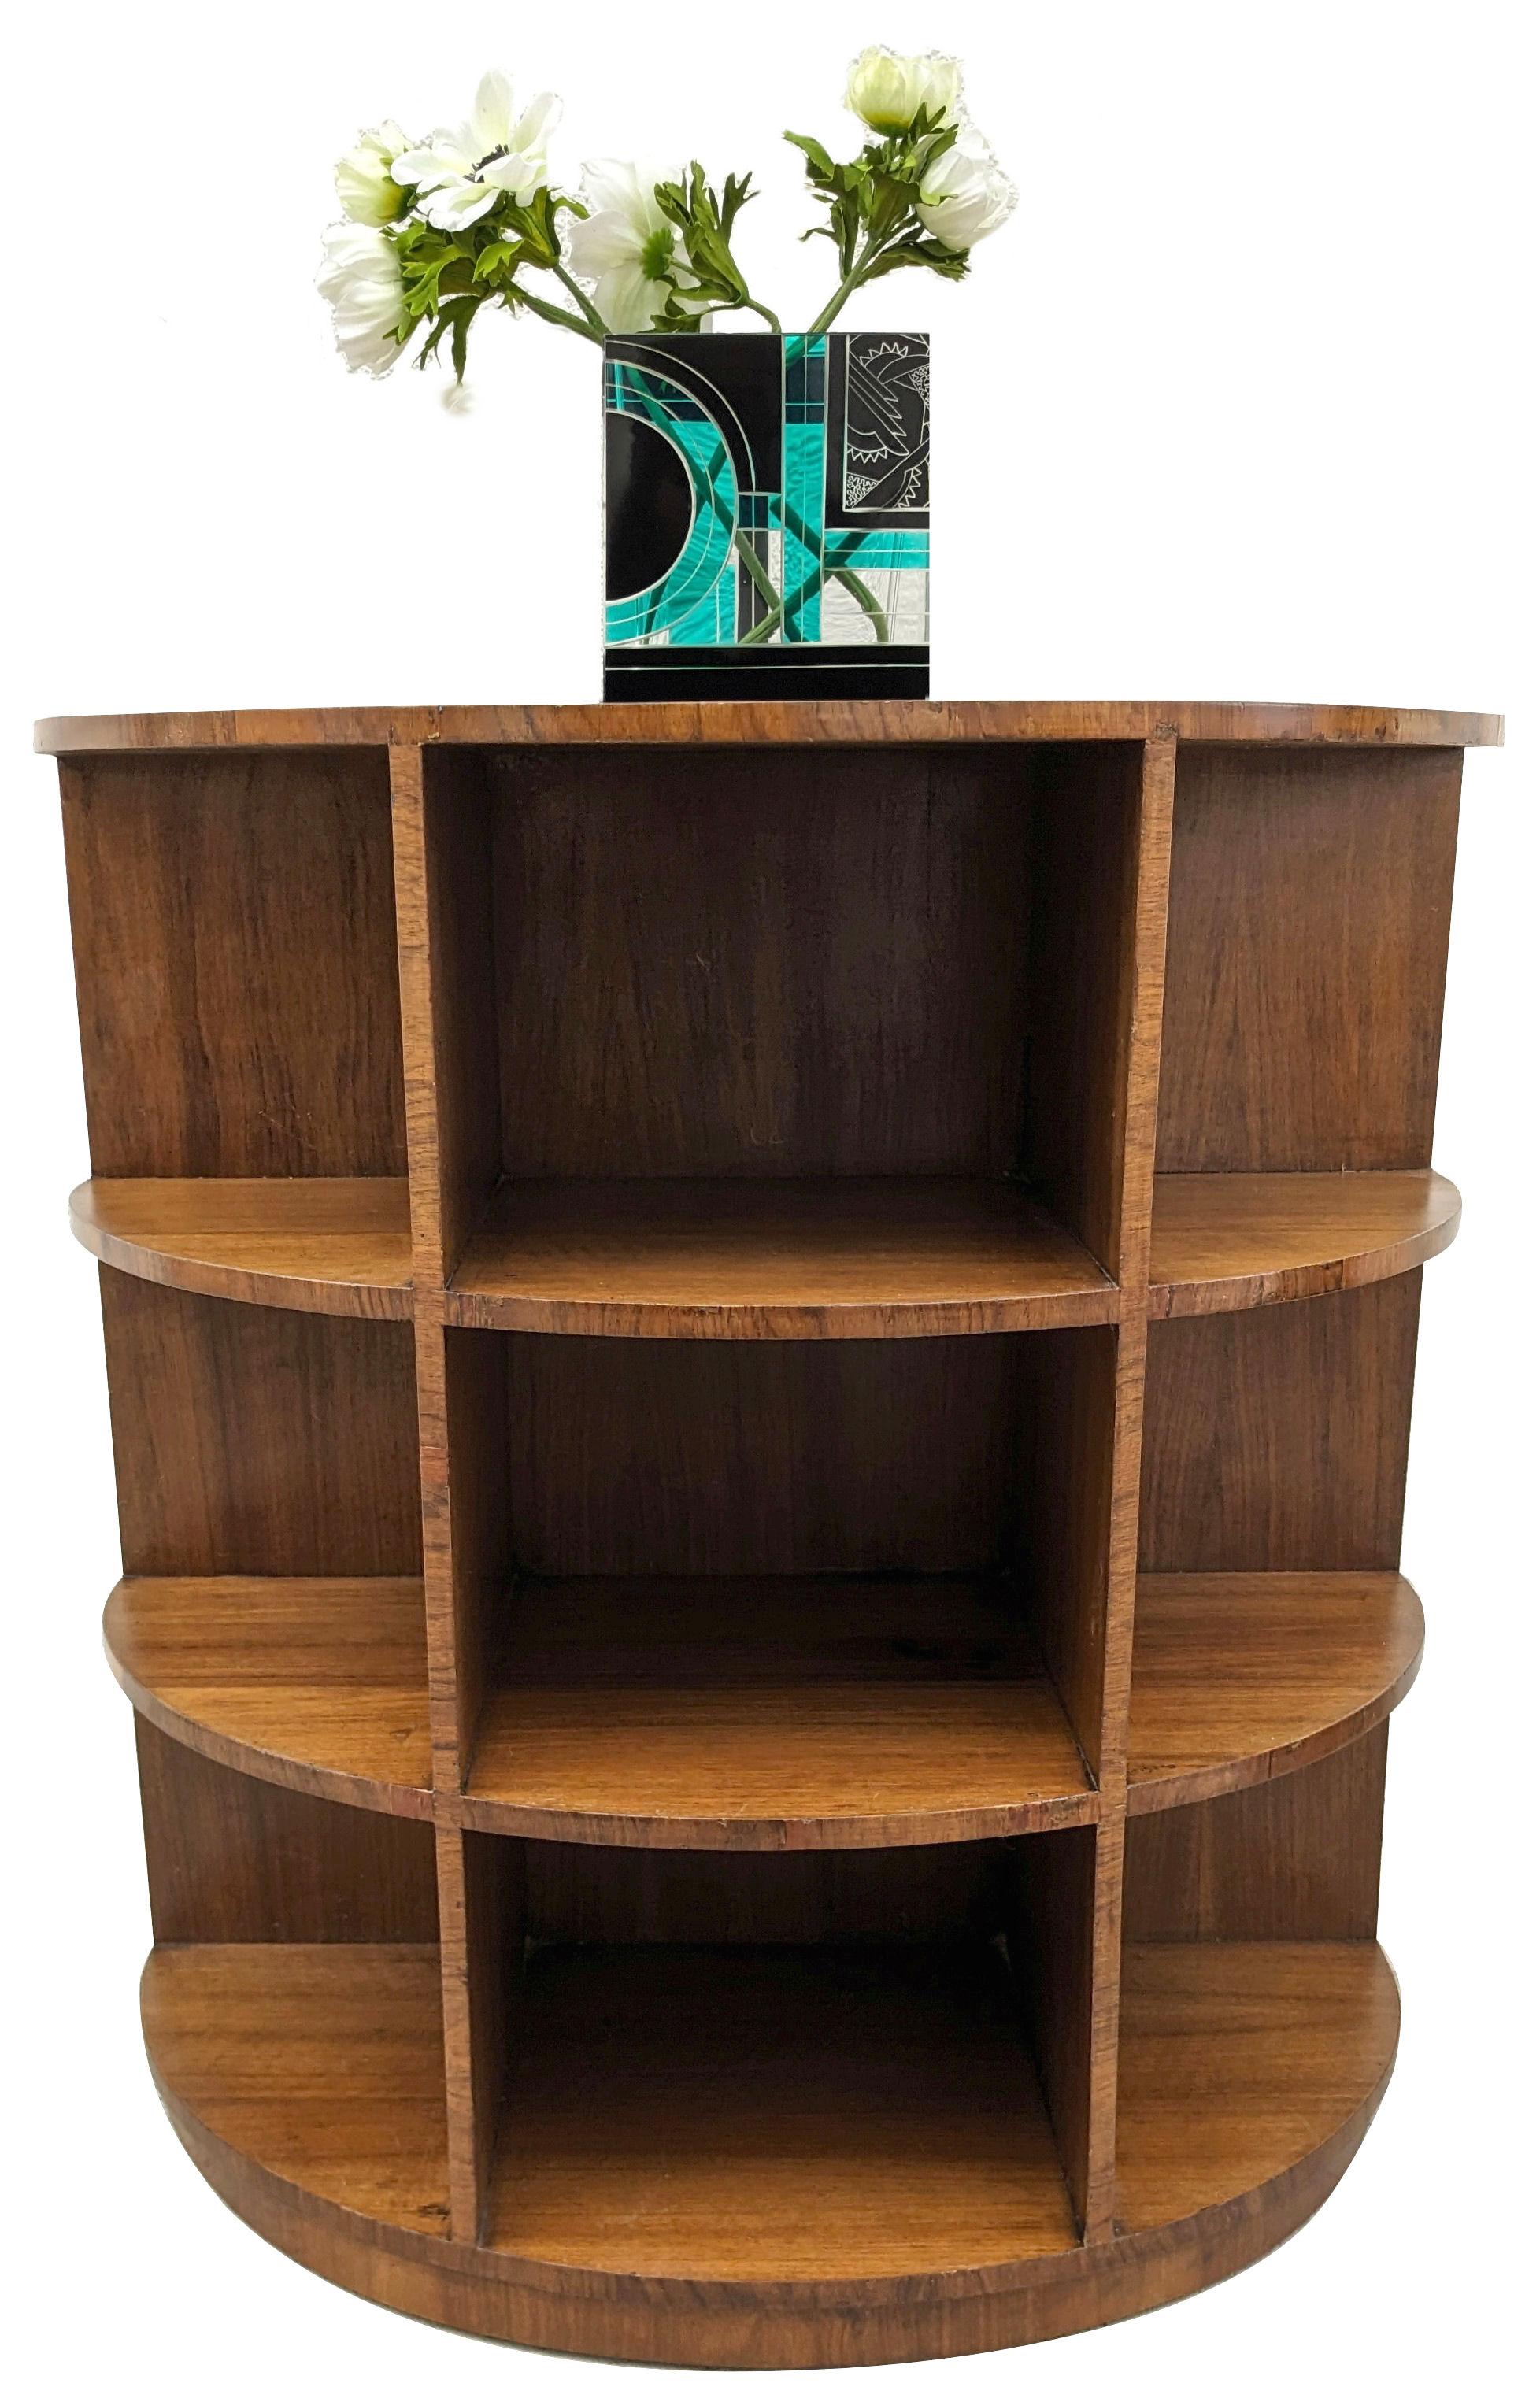 For your consideration is this very attractive Art Deco half circle walnut bookcase. Dating to the 1930's and English in origin this fabulous piece could either work as intended for books or would also be great for displaying collections. Features